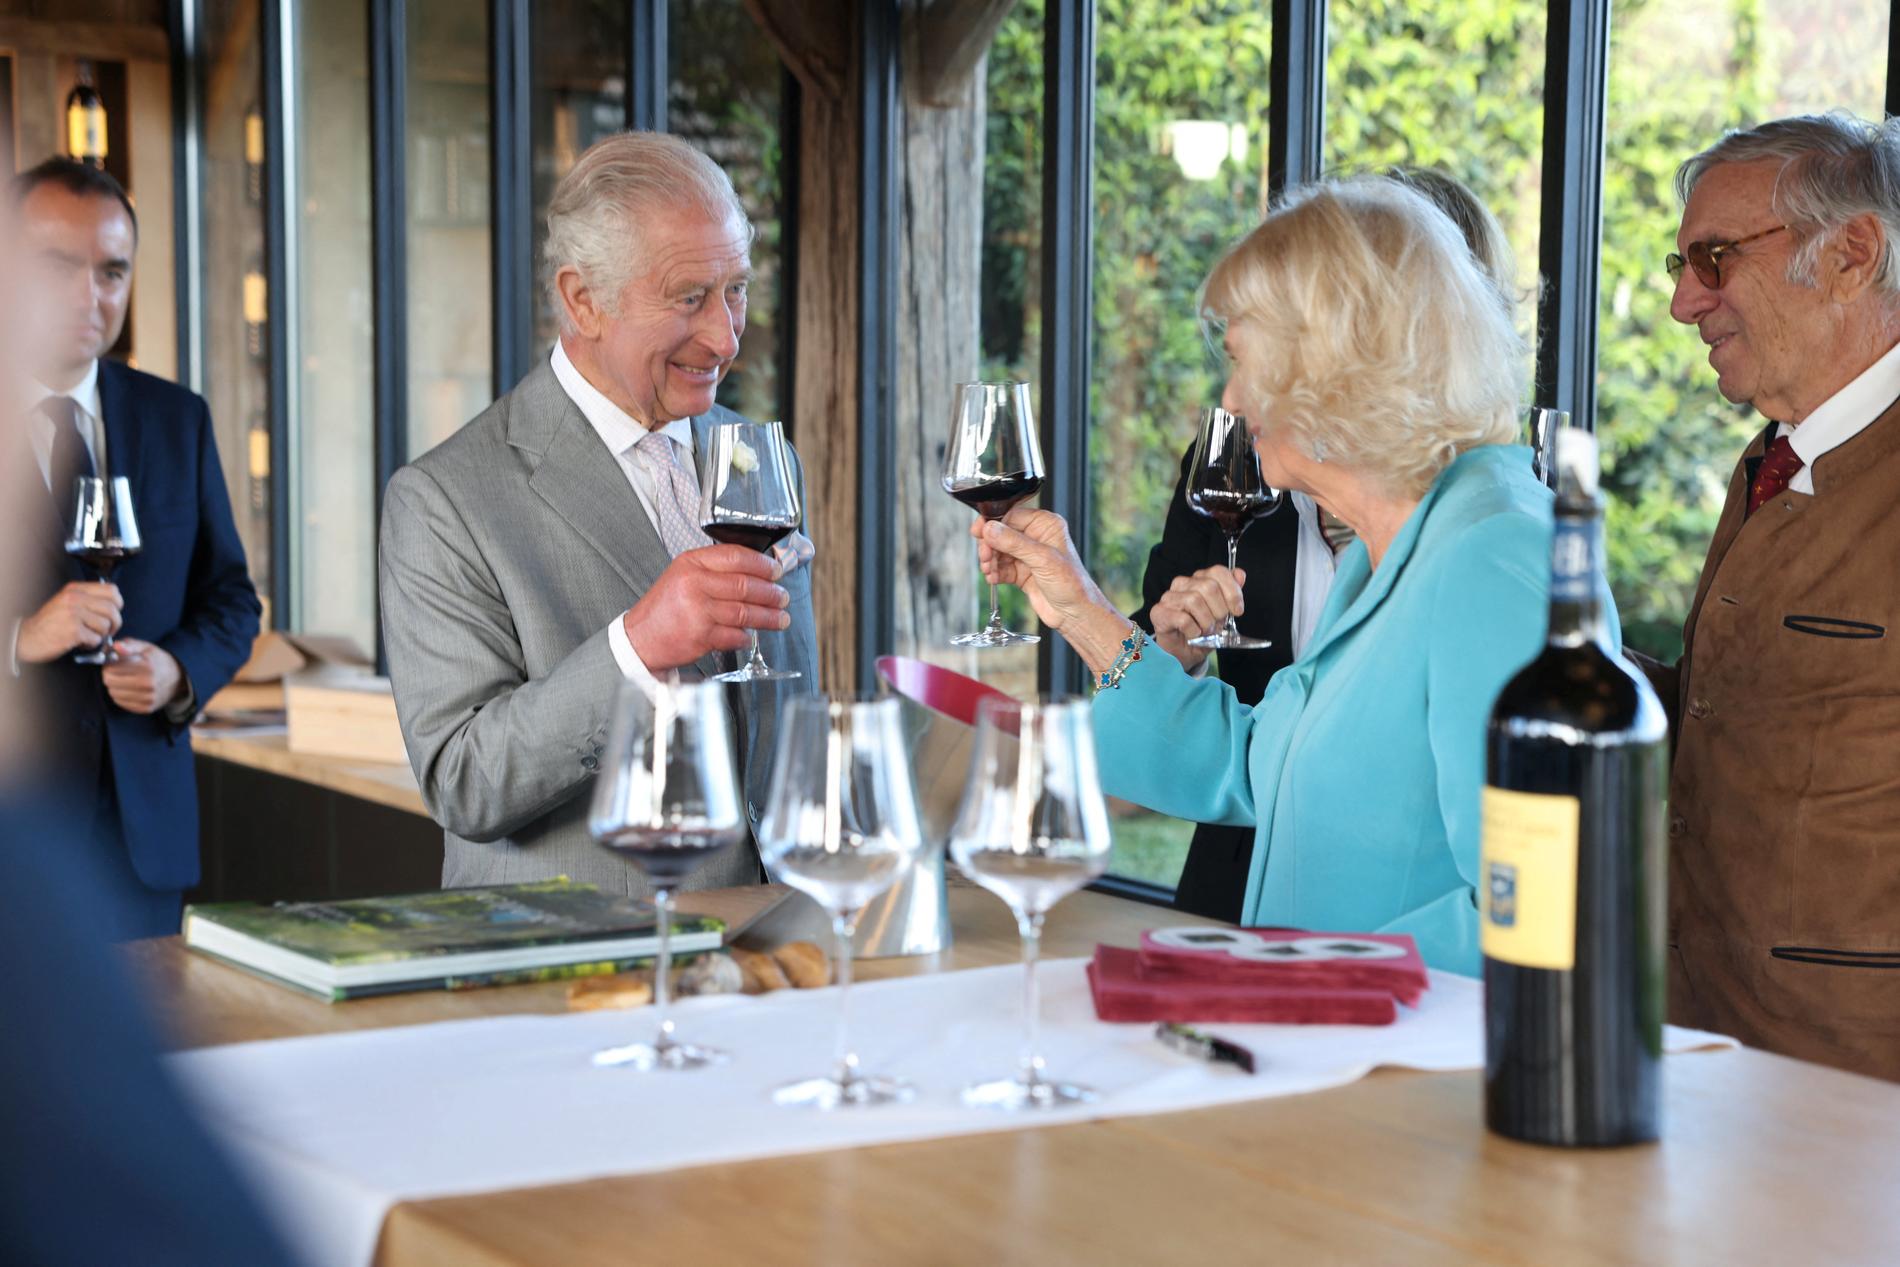 King Charles and Queen Camilla toast each other in France